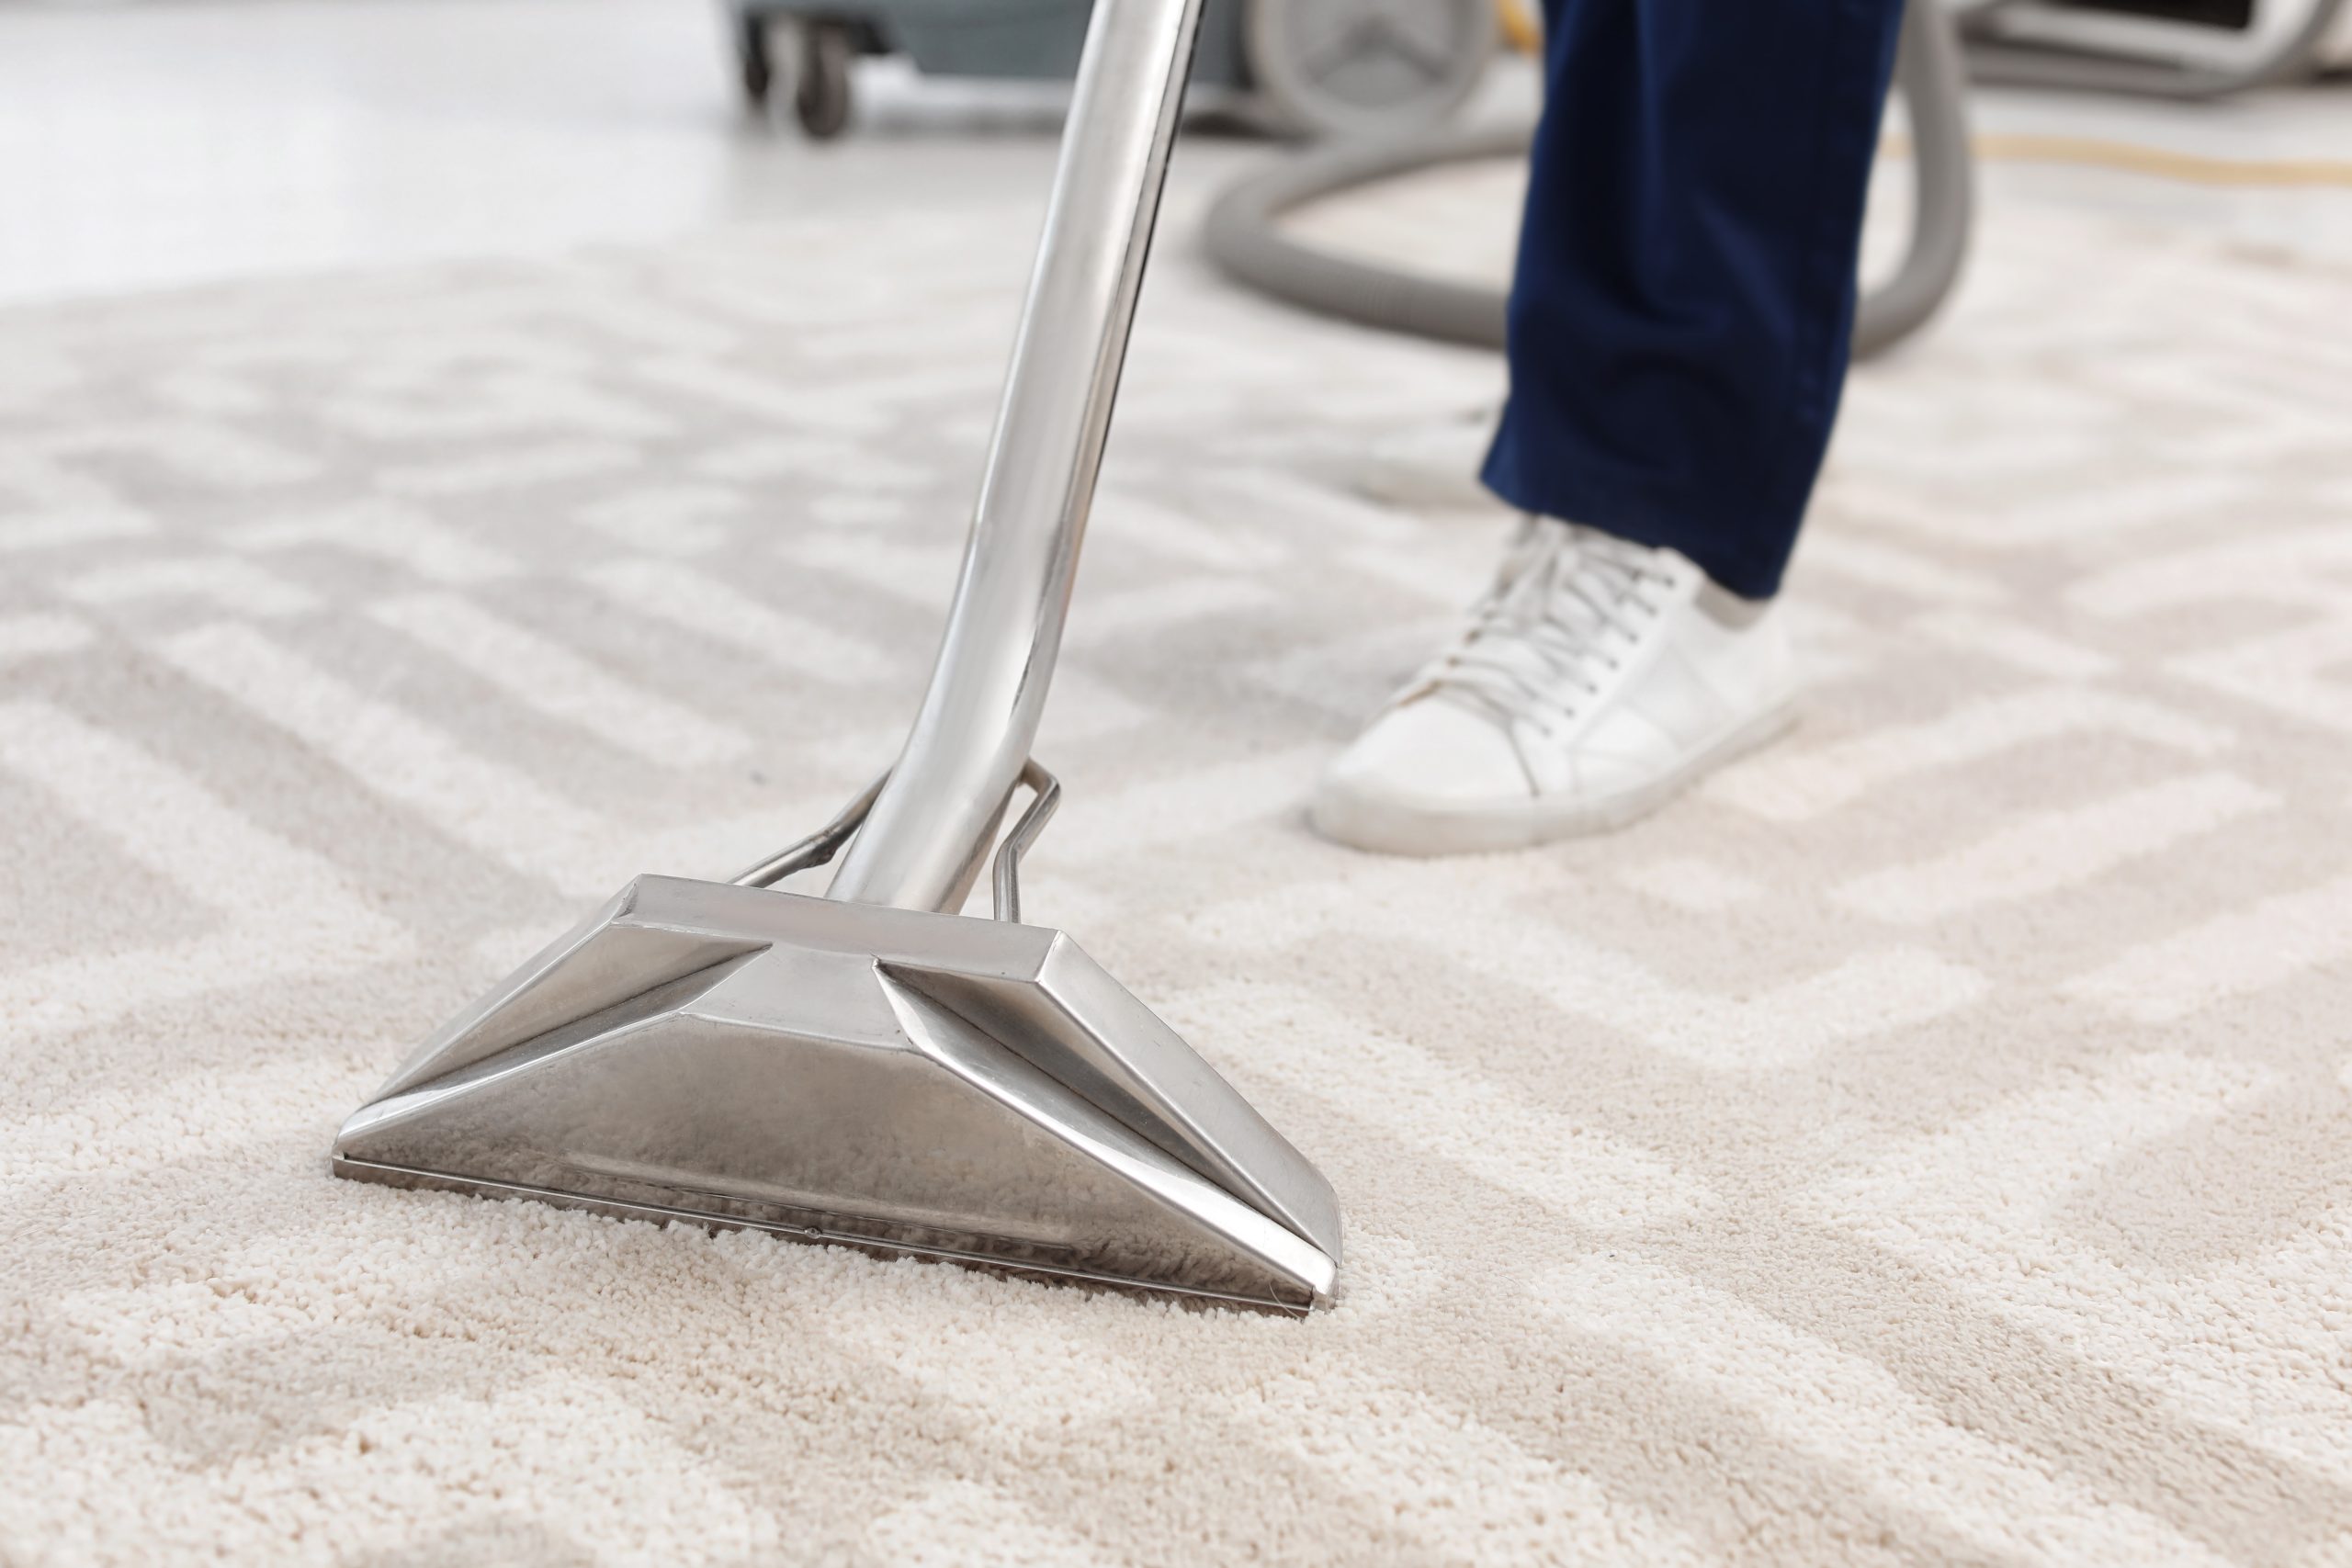 Male,Worker,Removing,Dirt,From,Carpet,With,Professional,Vacuum,Cleaner